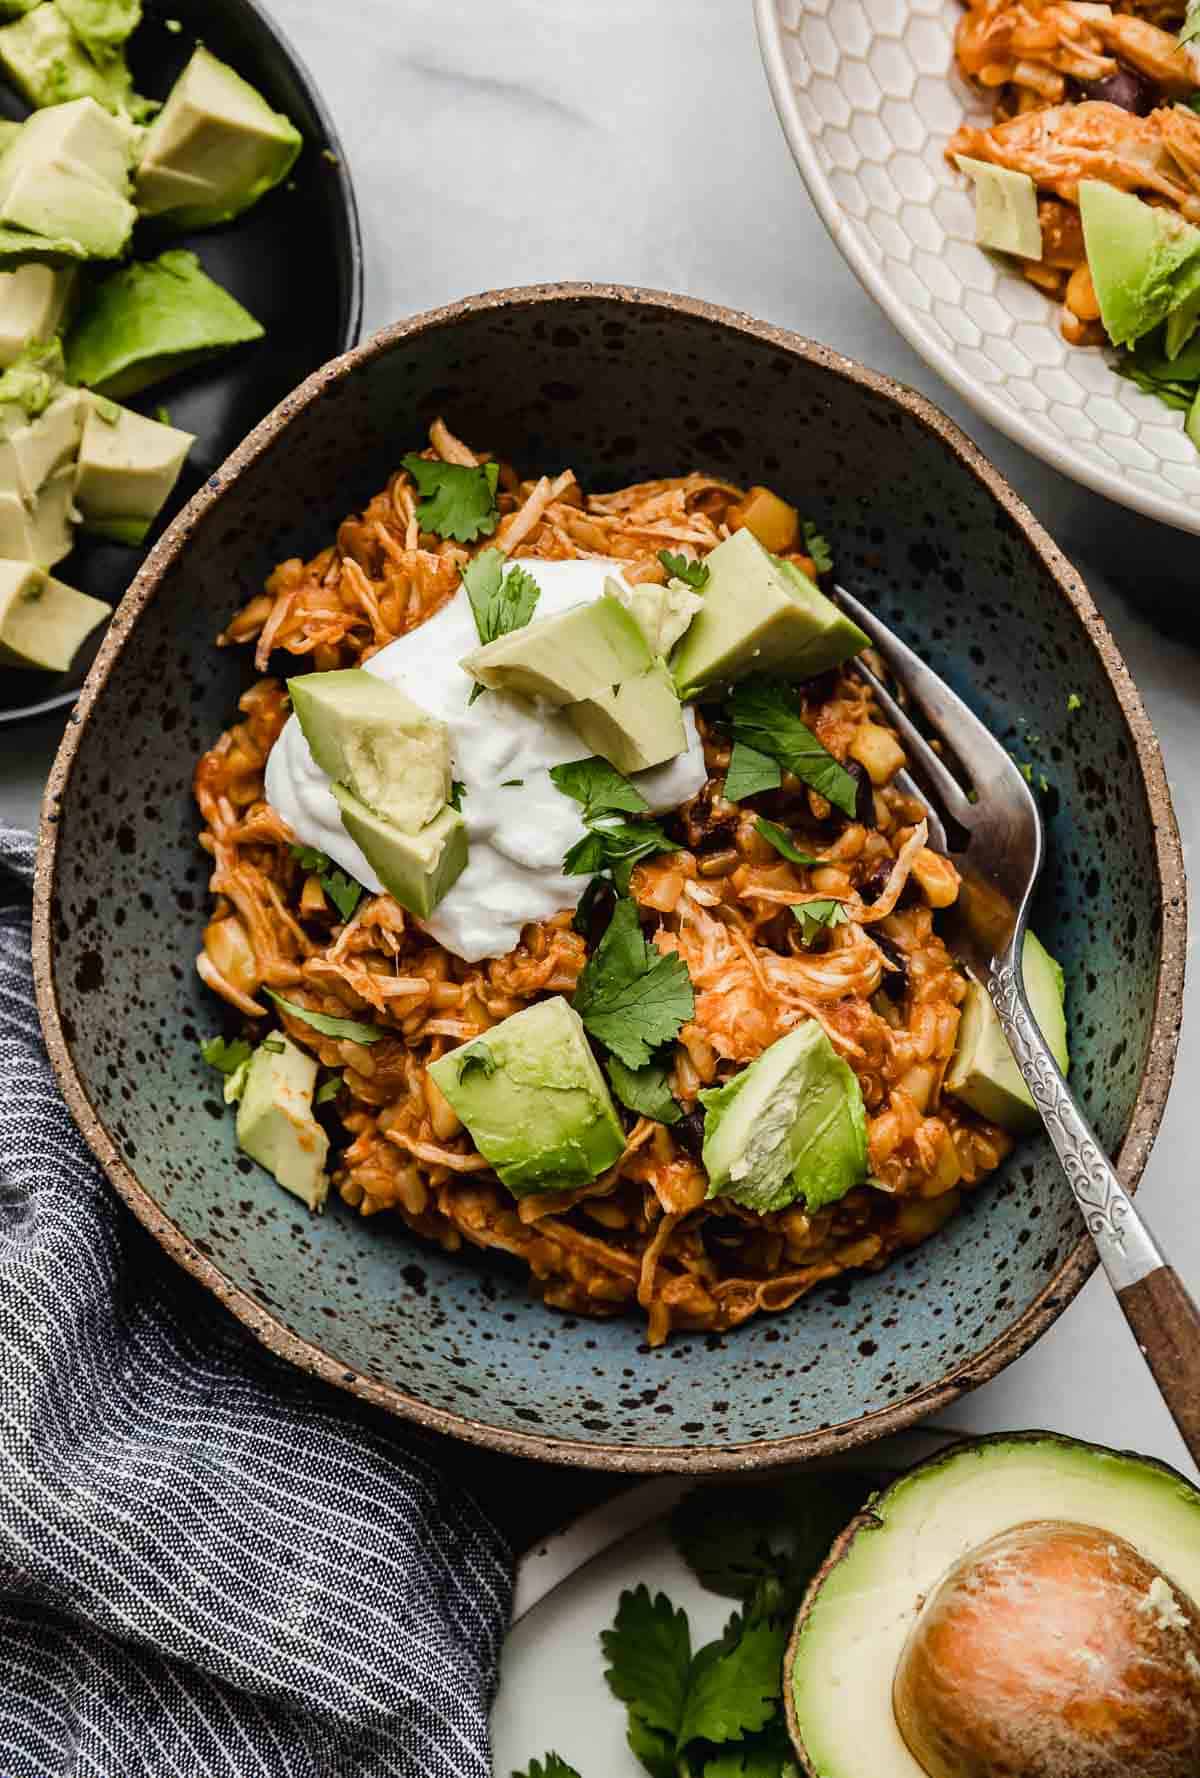 A blue bowl filled with shredded chicken taco bowls made in the instant pot.